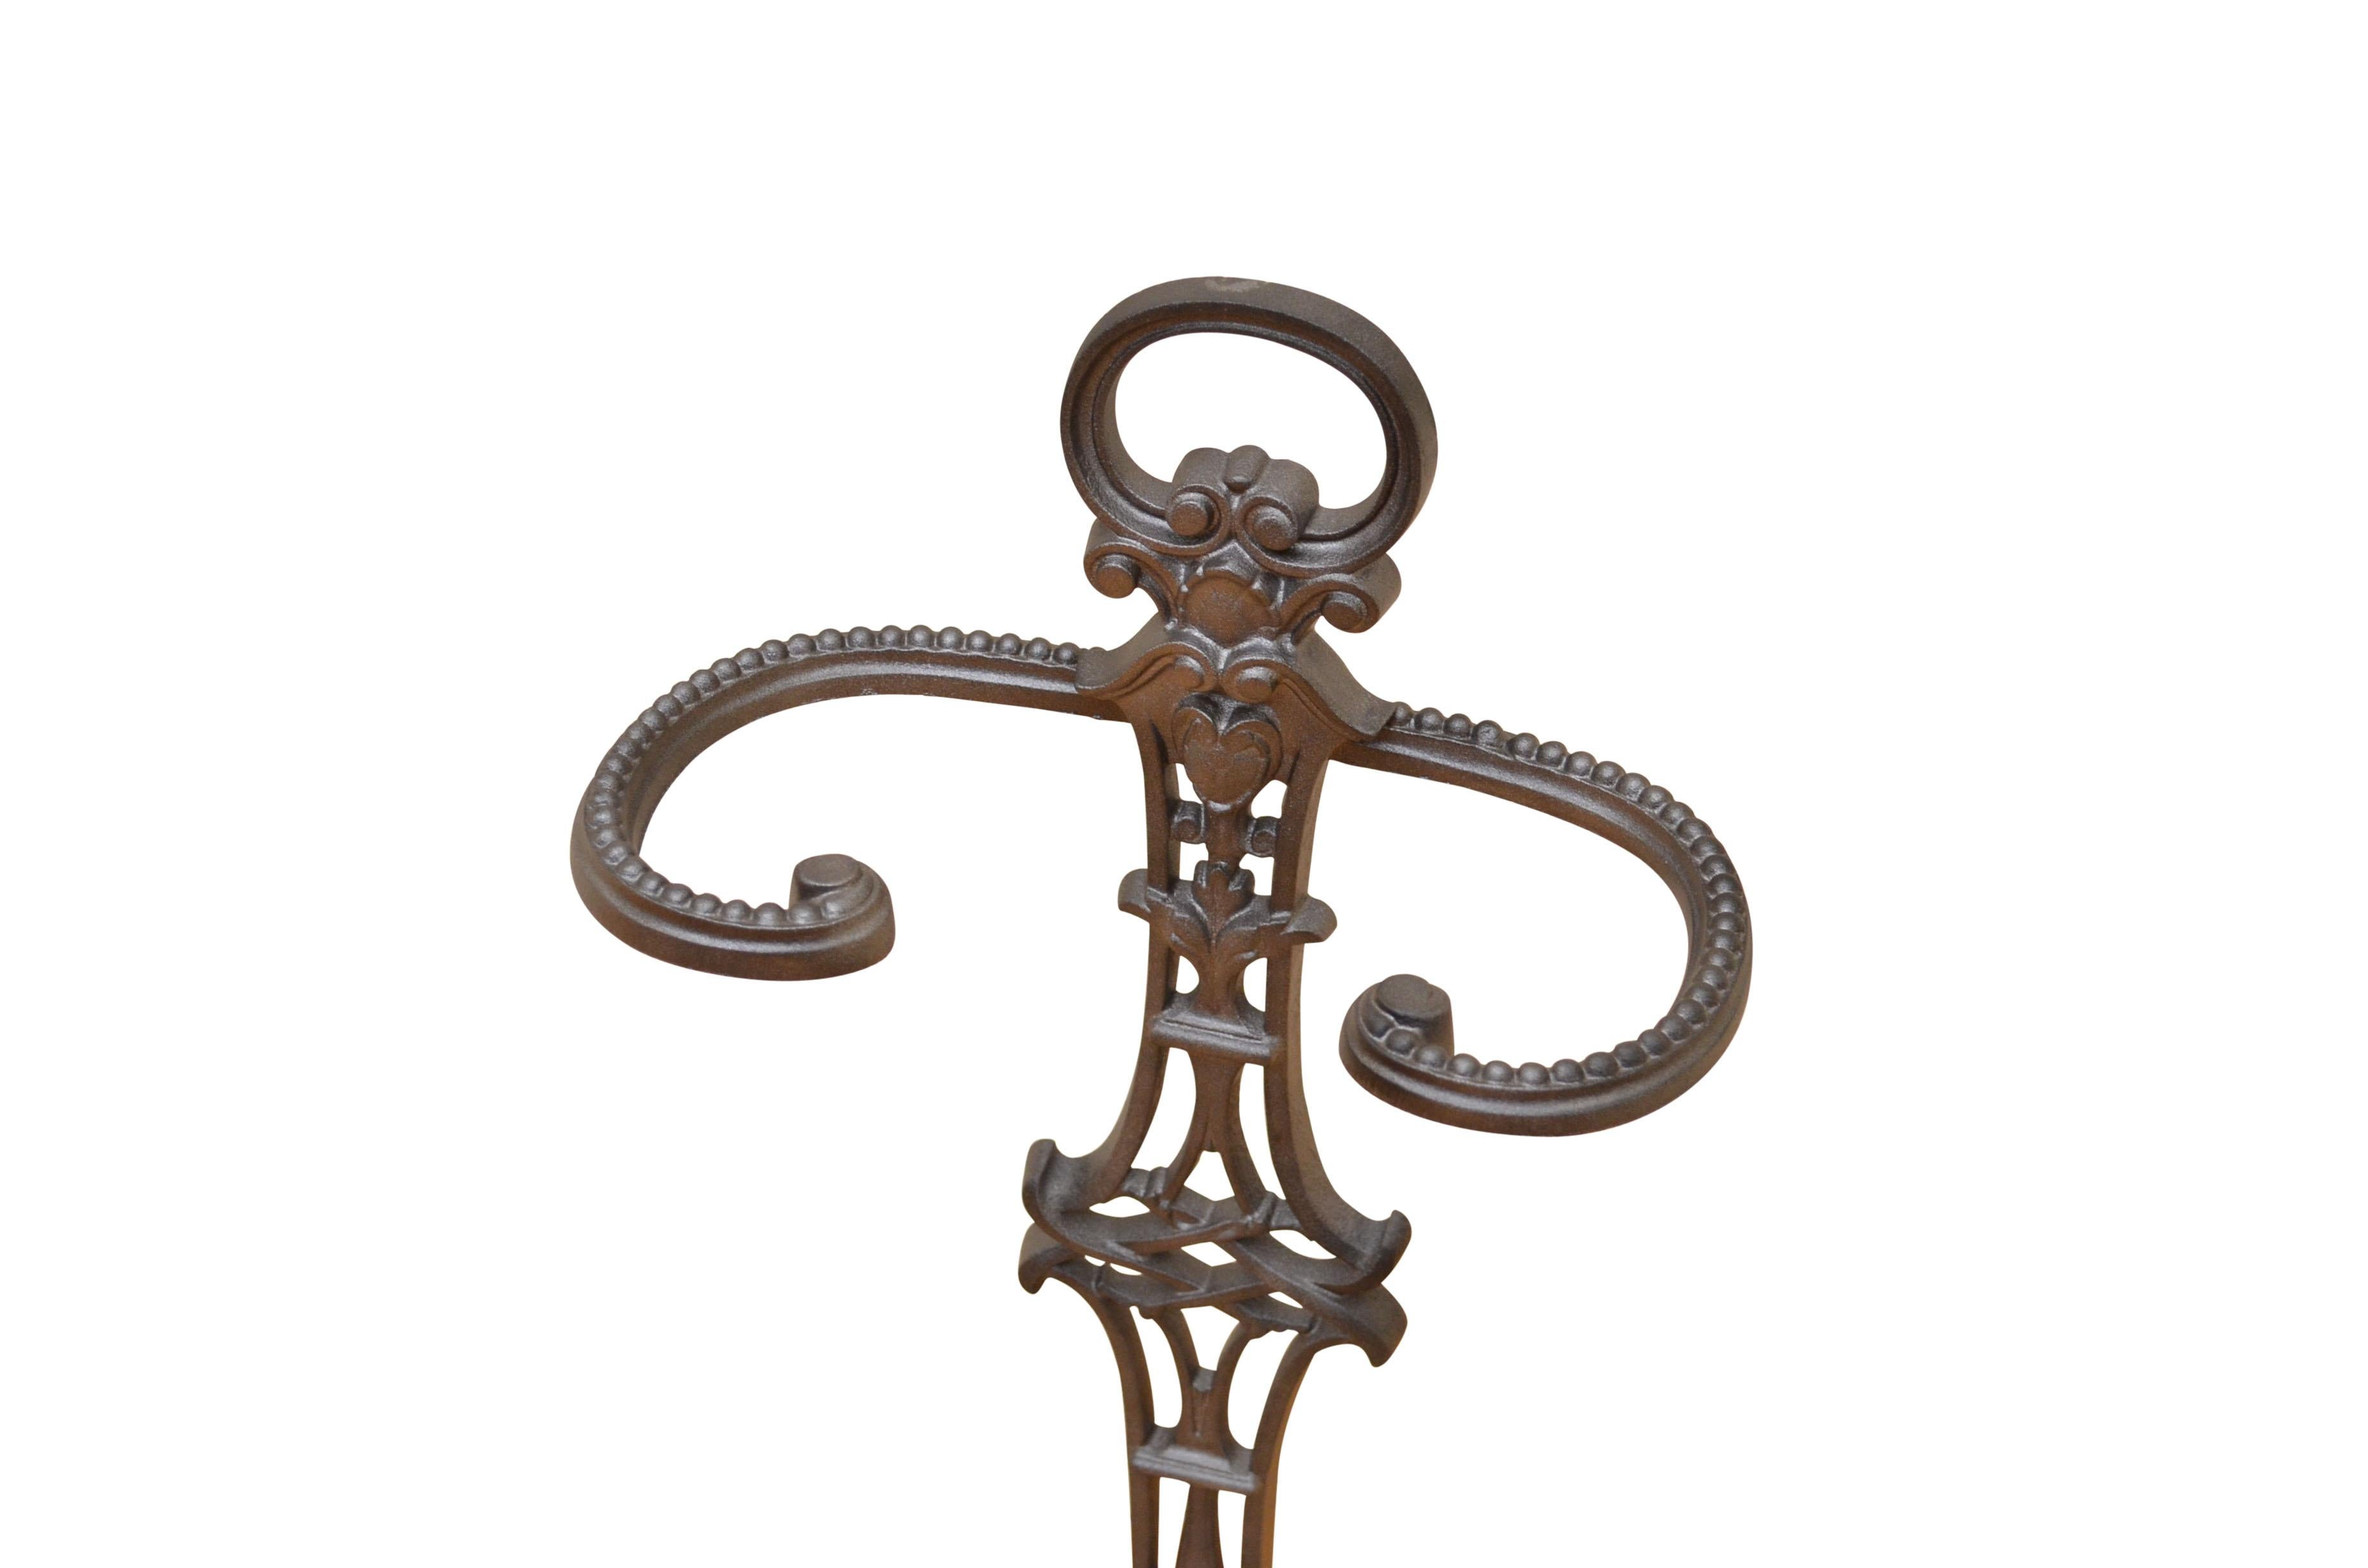 K0343 19th century French cast iron stick stand or fire irons stand with pierced decoration and shaped drip tray, all in excellent home ready condition. c1880
Measures: H 26